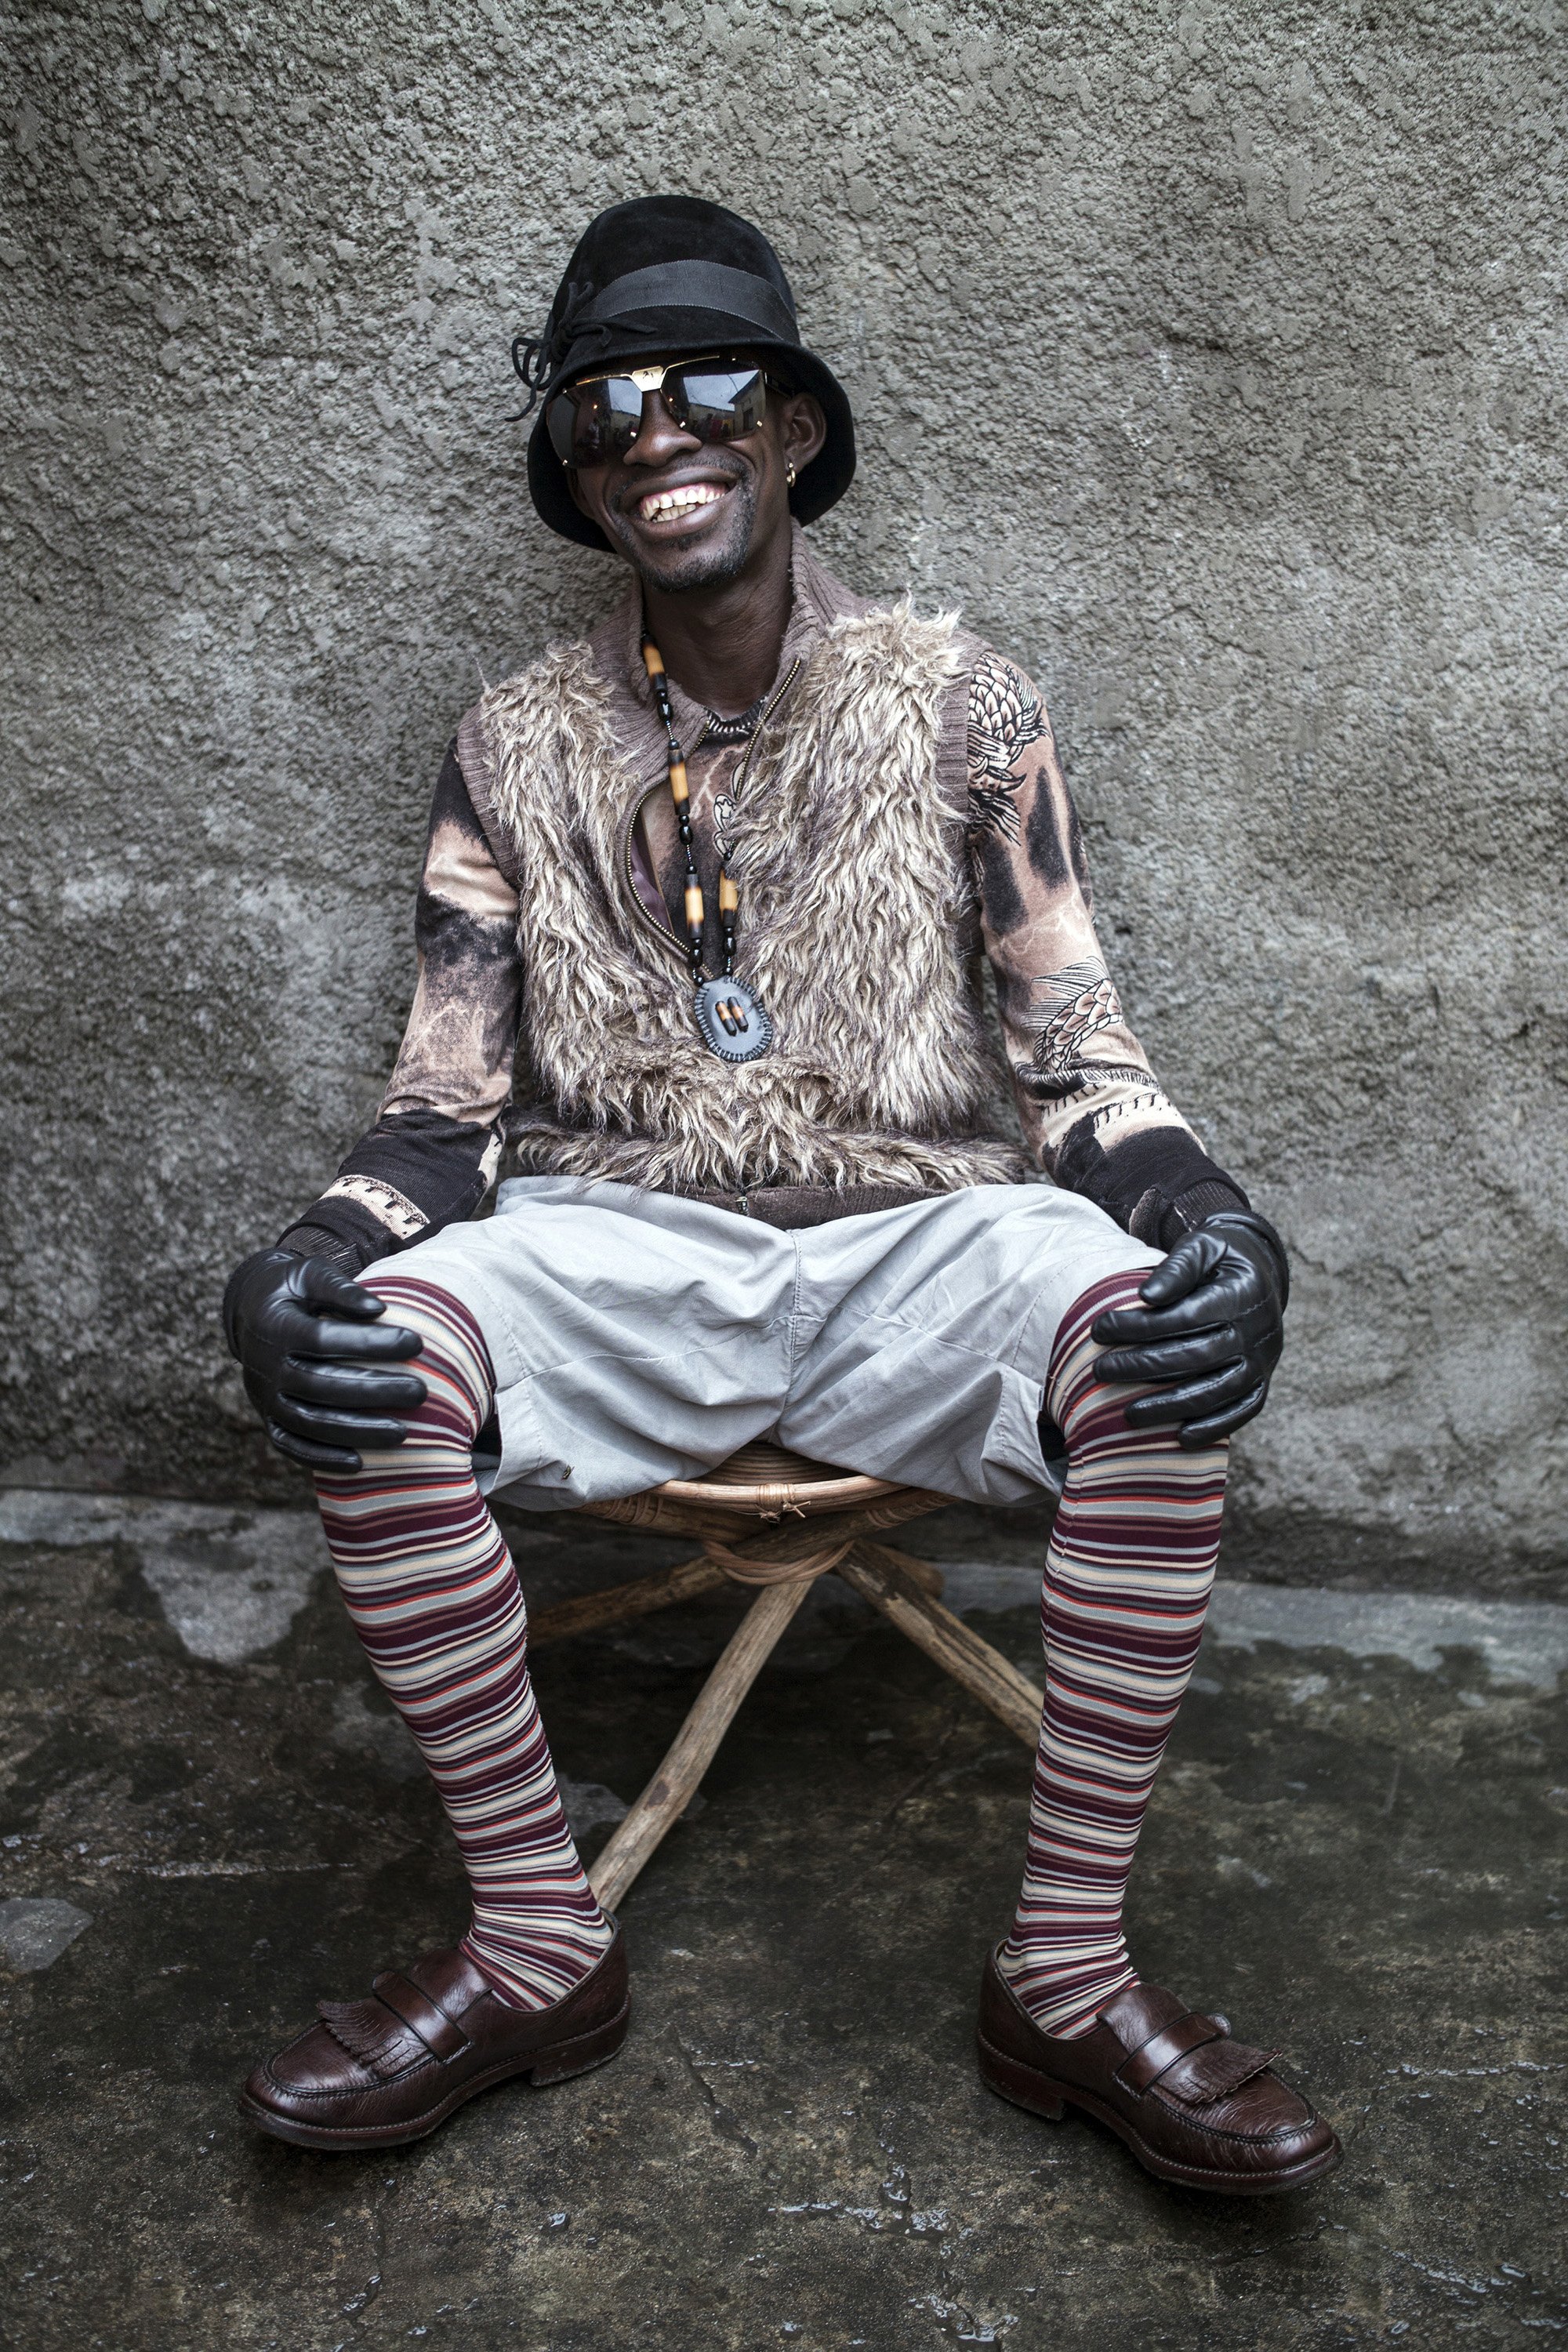  A Sapeur member of Leopards group sits in a backyard in Kinshasa, DRC. SAPE is to dress with “elegance and style". Many Sapeurs are unemployed, poor, and live in harsh conditions in Kinshasa, a city of about 10 million people. For many of them being